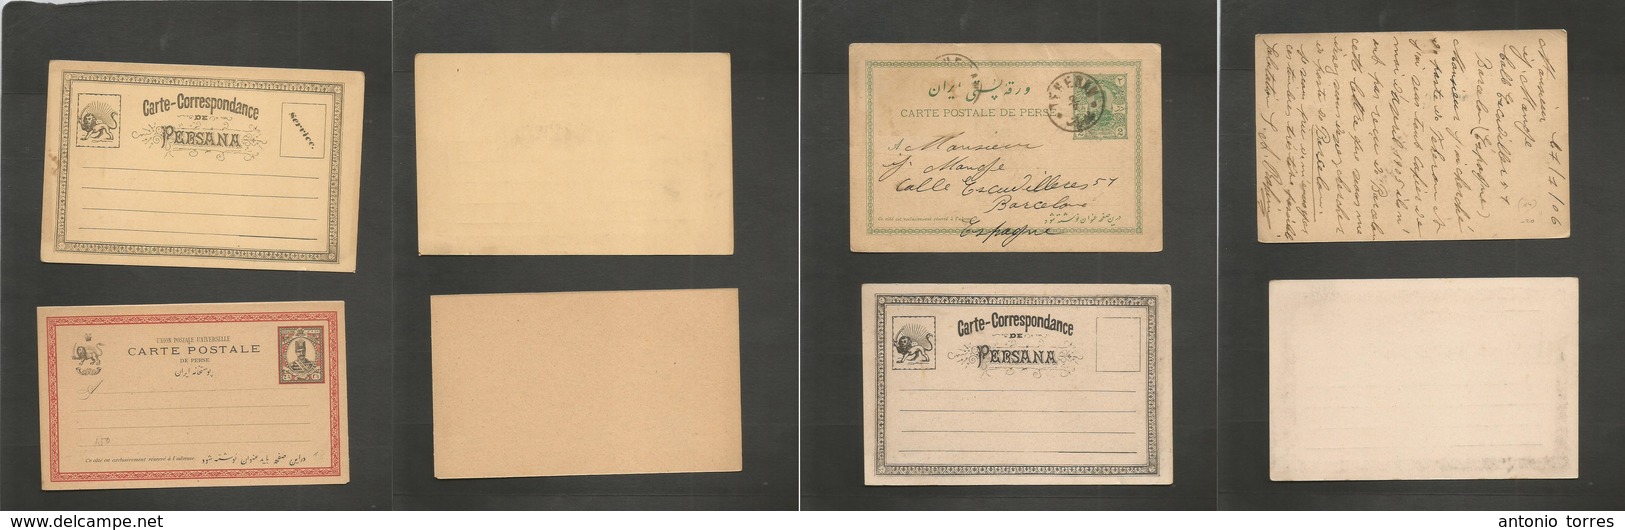 Persia. C. 1900s. 4 Diff Stationary Cards, Three Mint, One Used One Is Official. Excellent Opportunity. - Iran